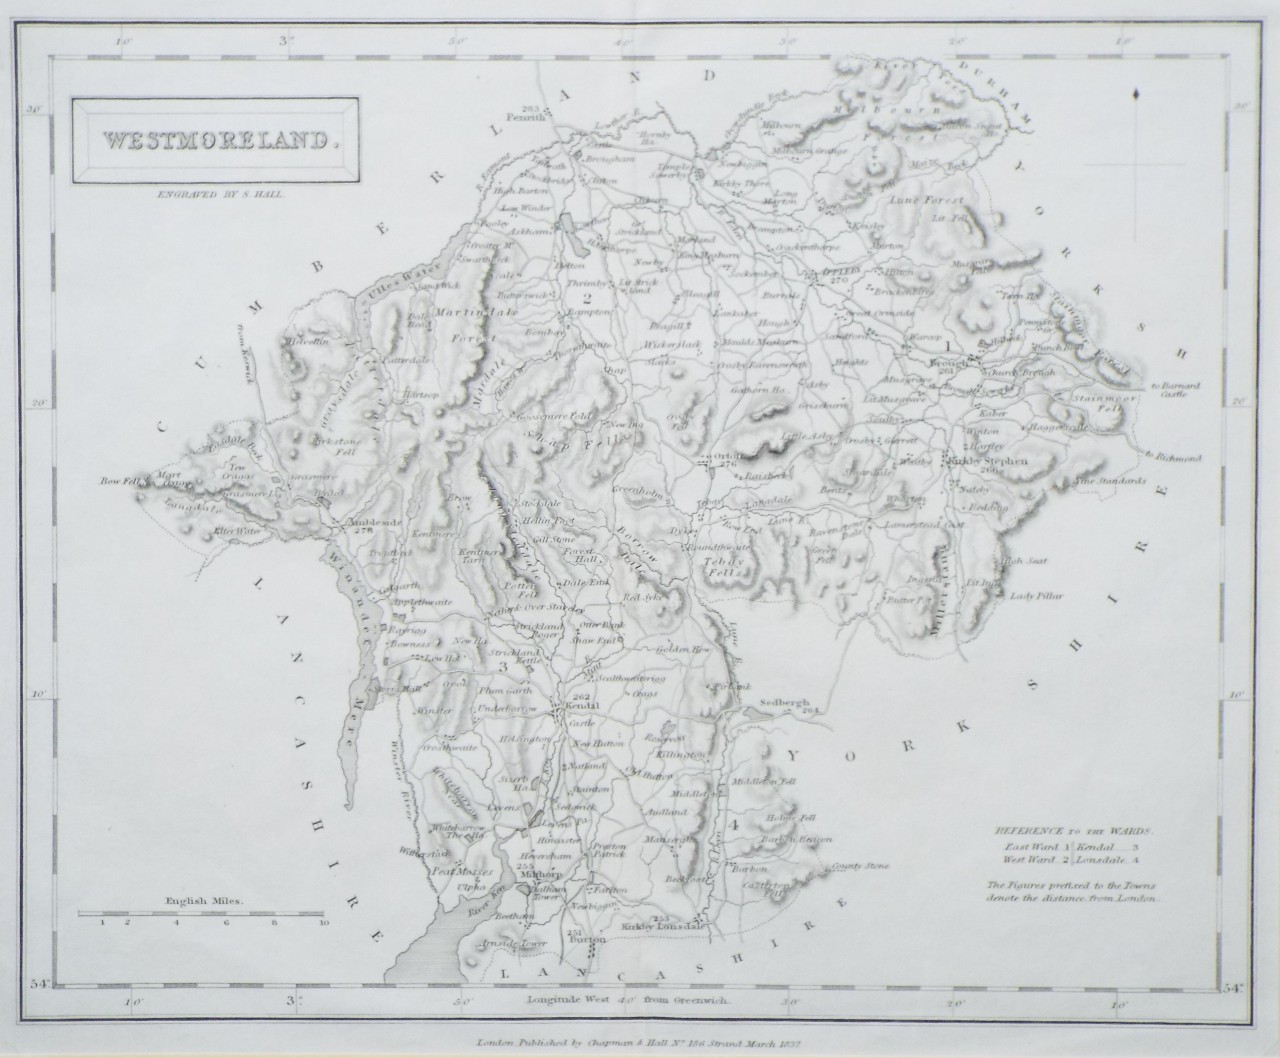 Map of Westmorland